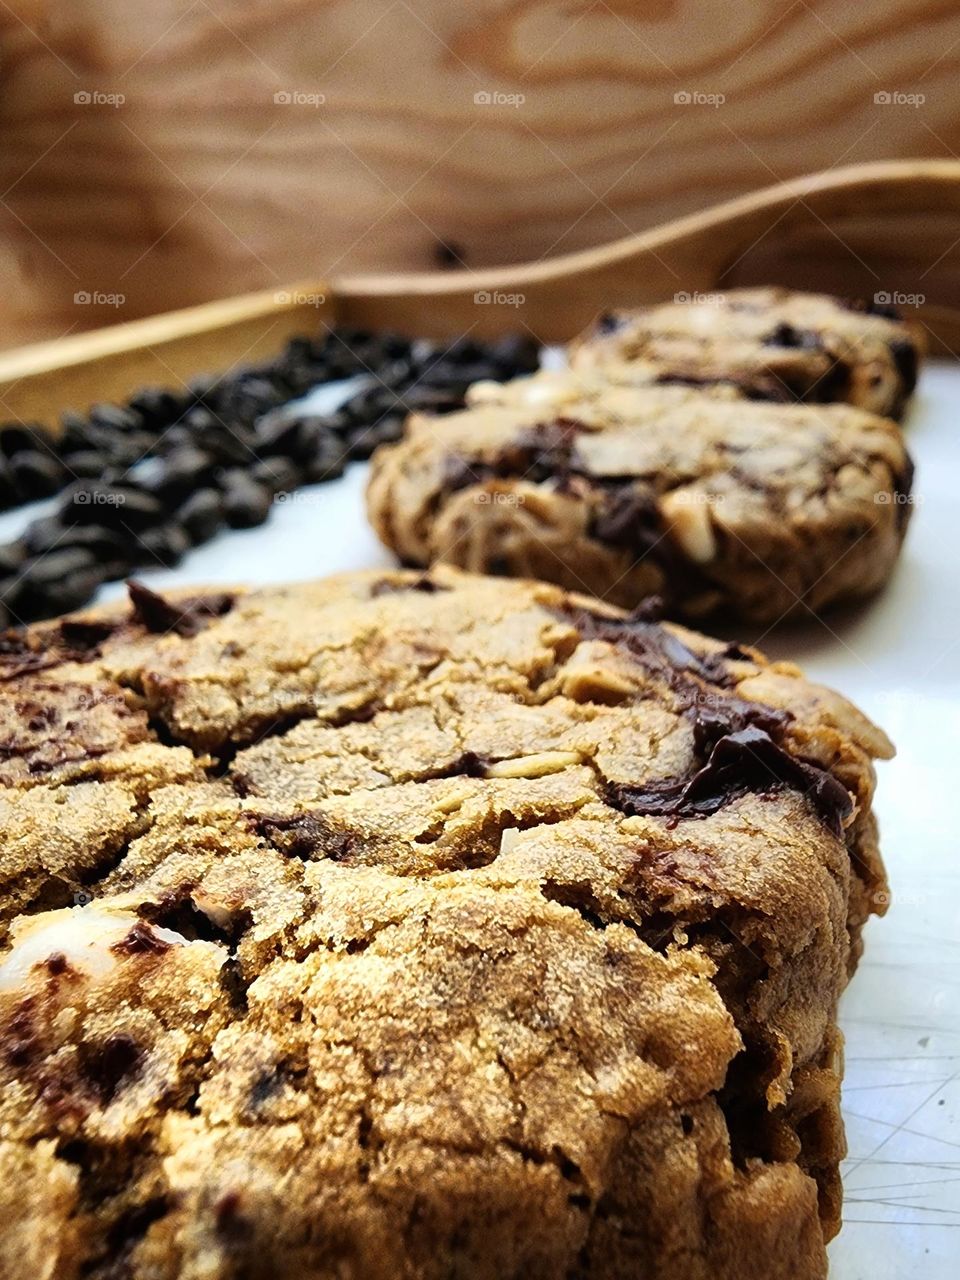 Oatmeal chocolate chip espresso cookies ☕️ 🍪